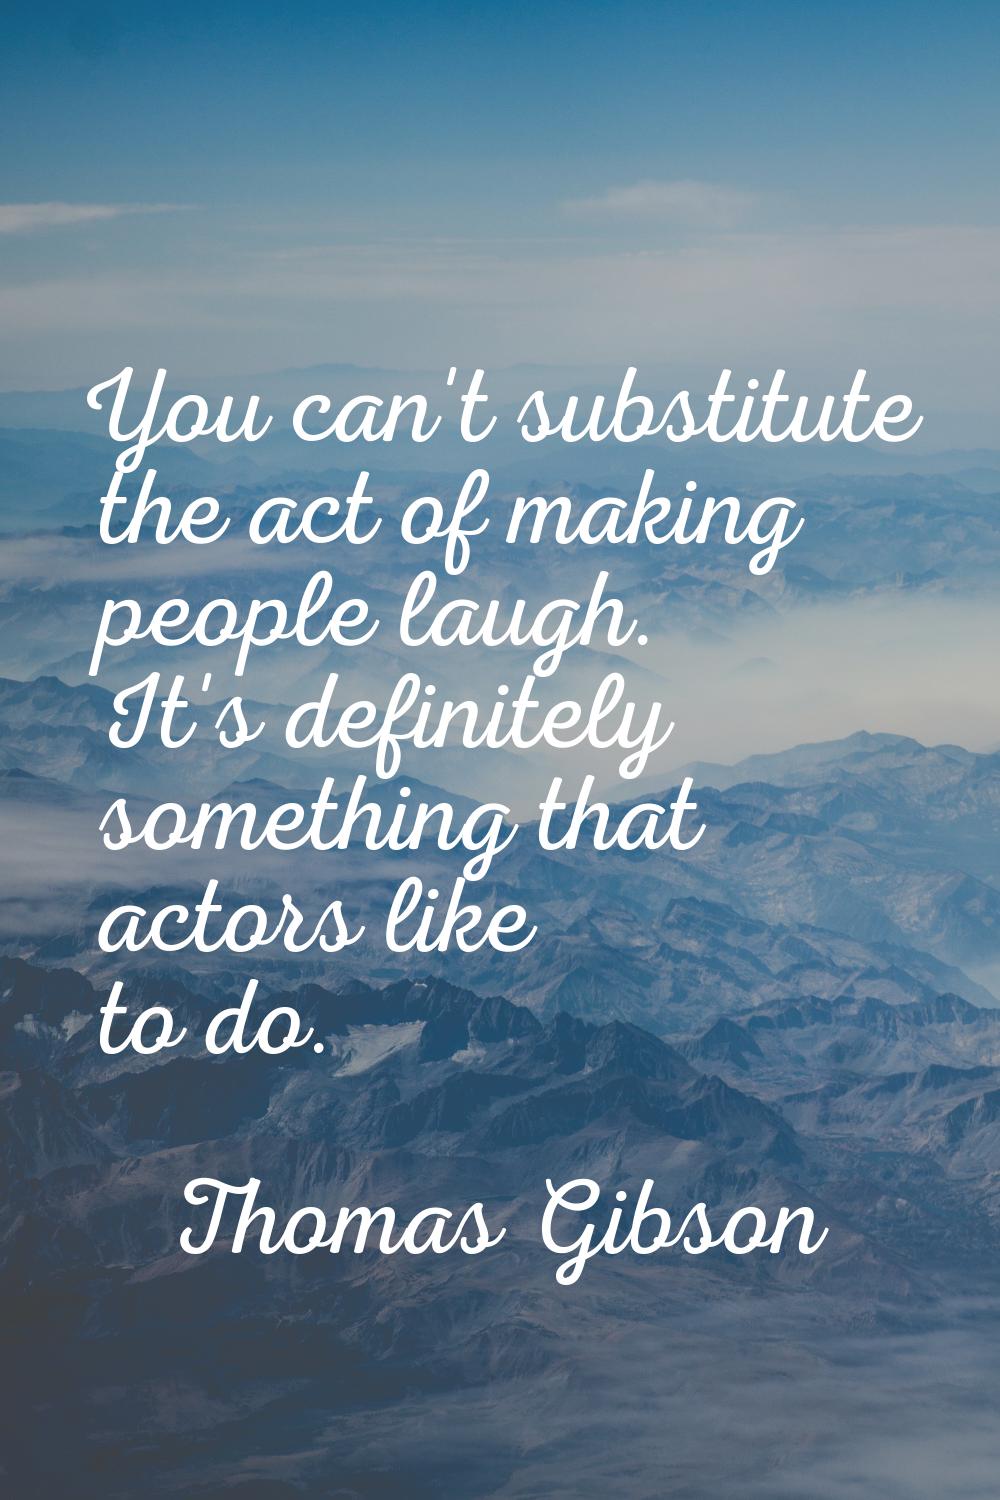 You can't substitute the act of making people laugh. It's definitely something that actors like to 